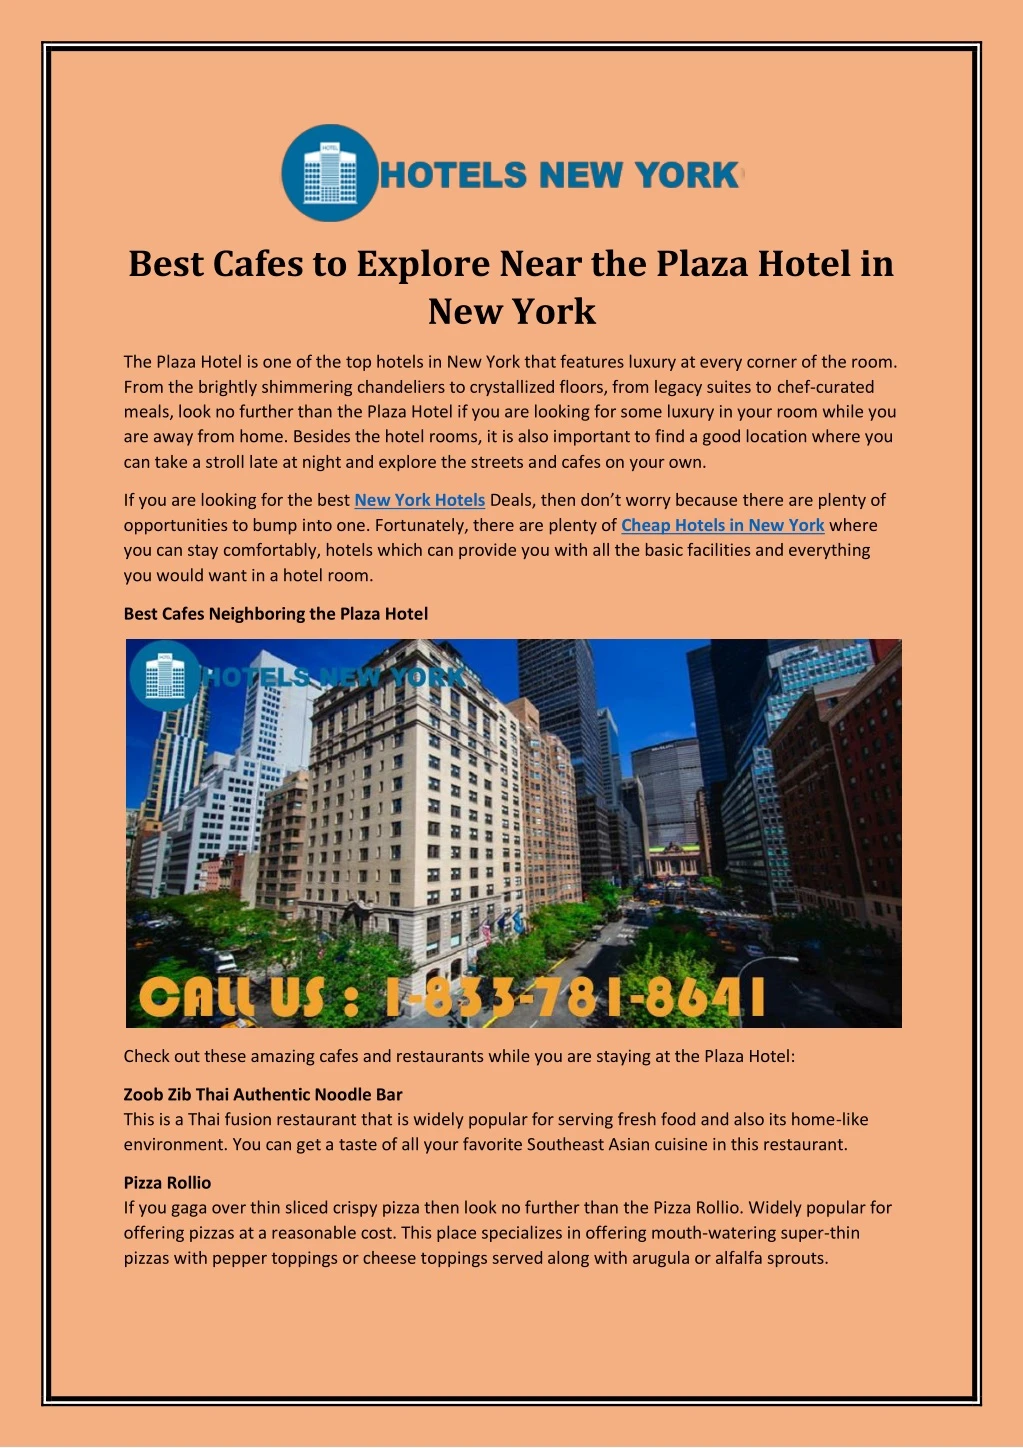 best cafes to explore near the plaza hotel